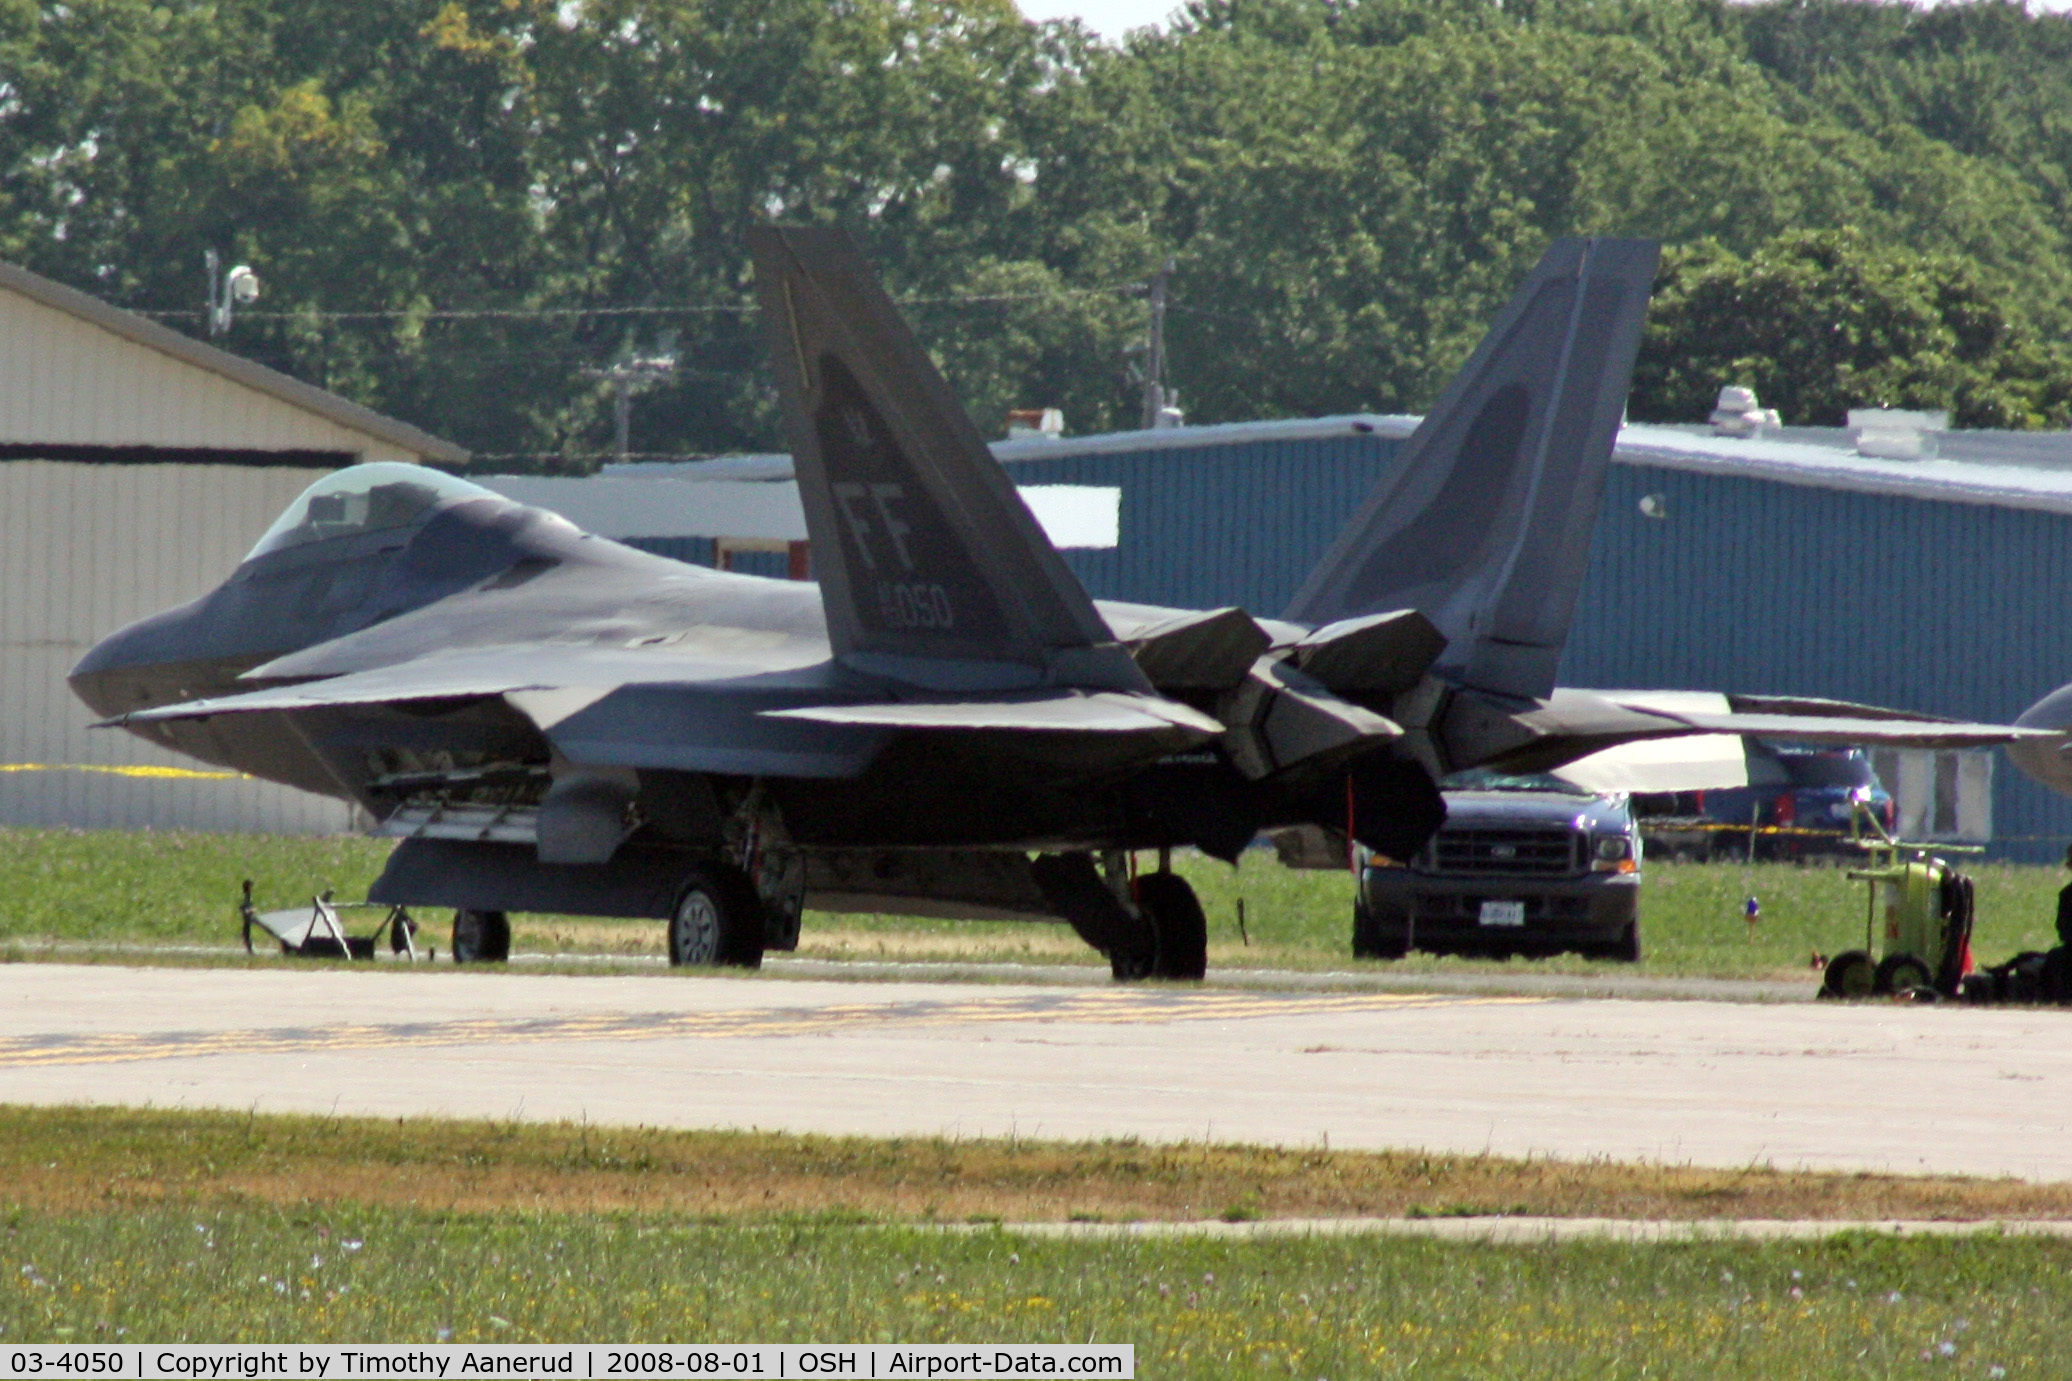 03-4050, 2003 Lockheed Martin F-22A Raptor C/N 4050, EAA AirVenture 2008, the F-22's were parked on the far side of the airfield